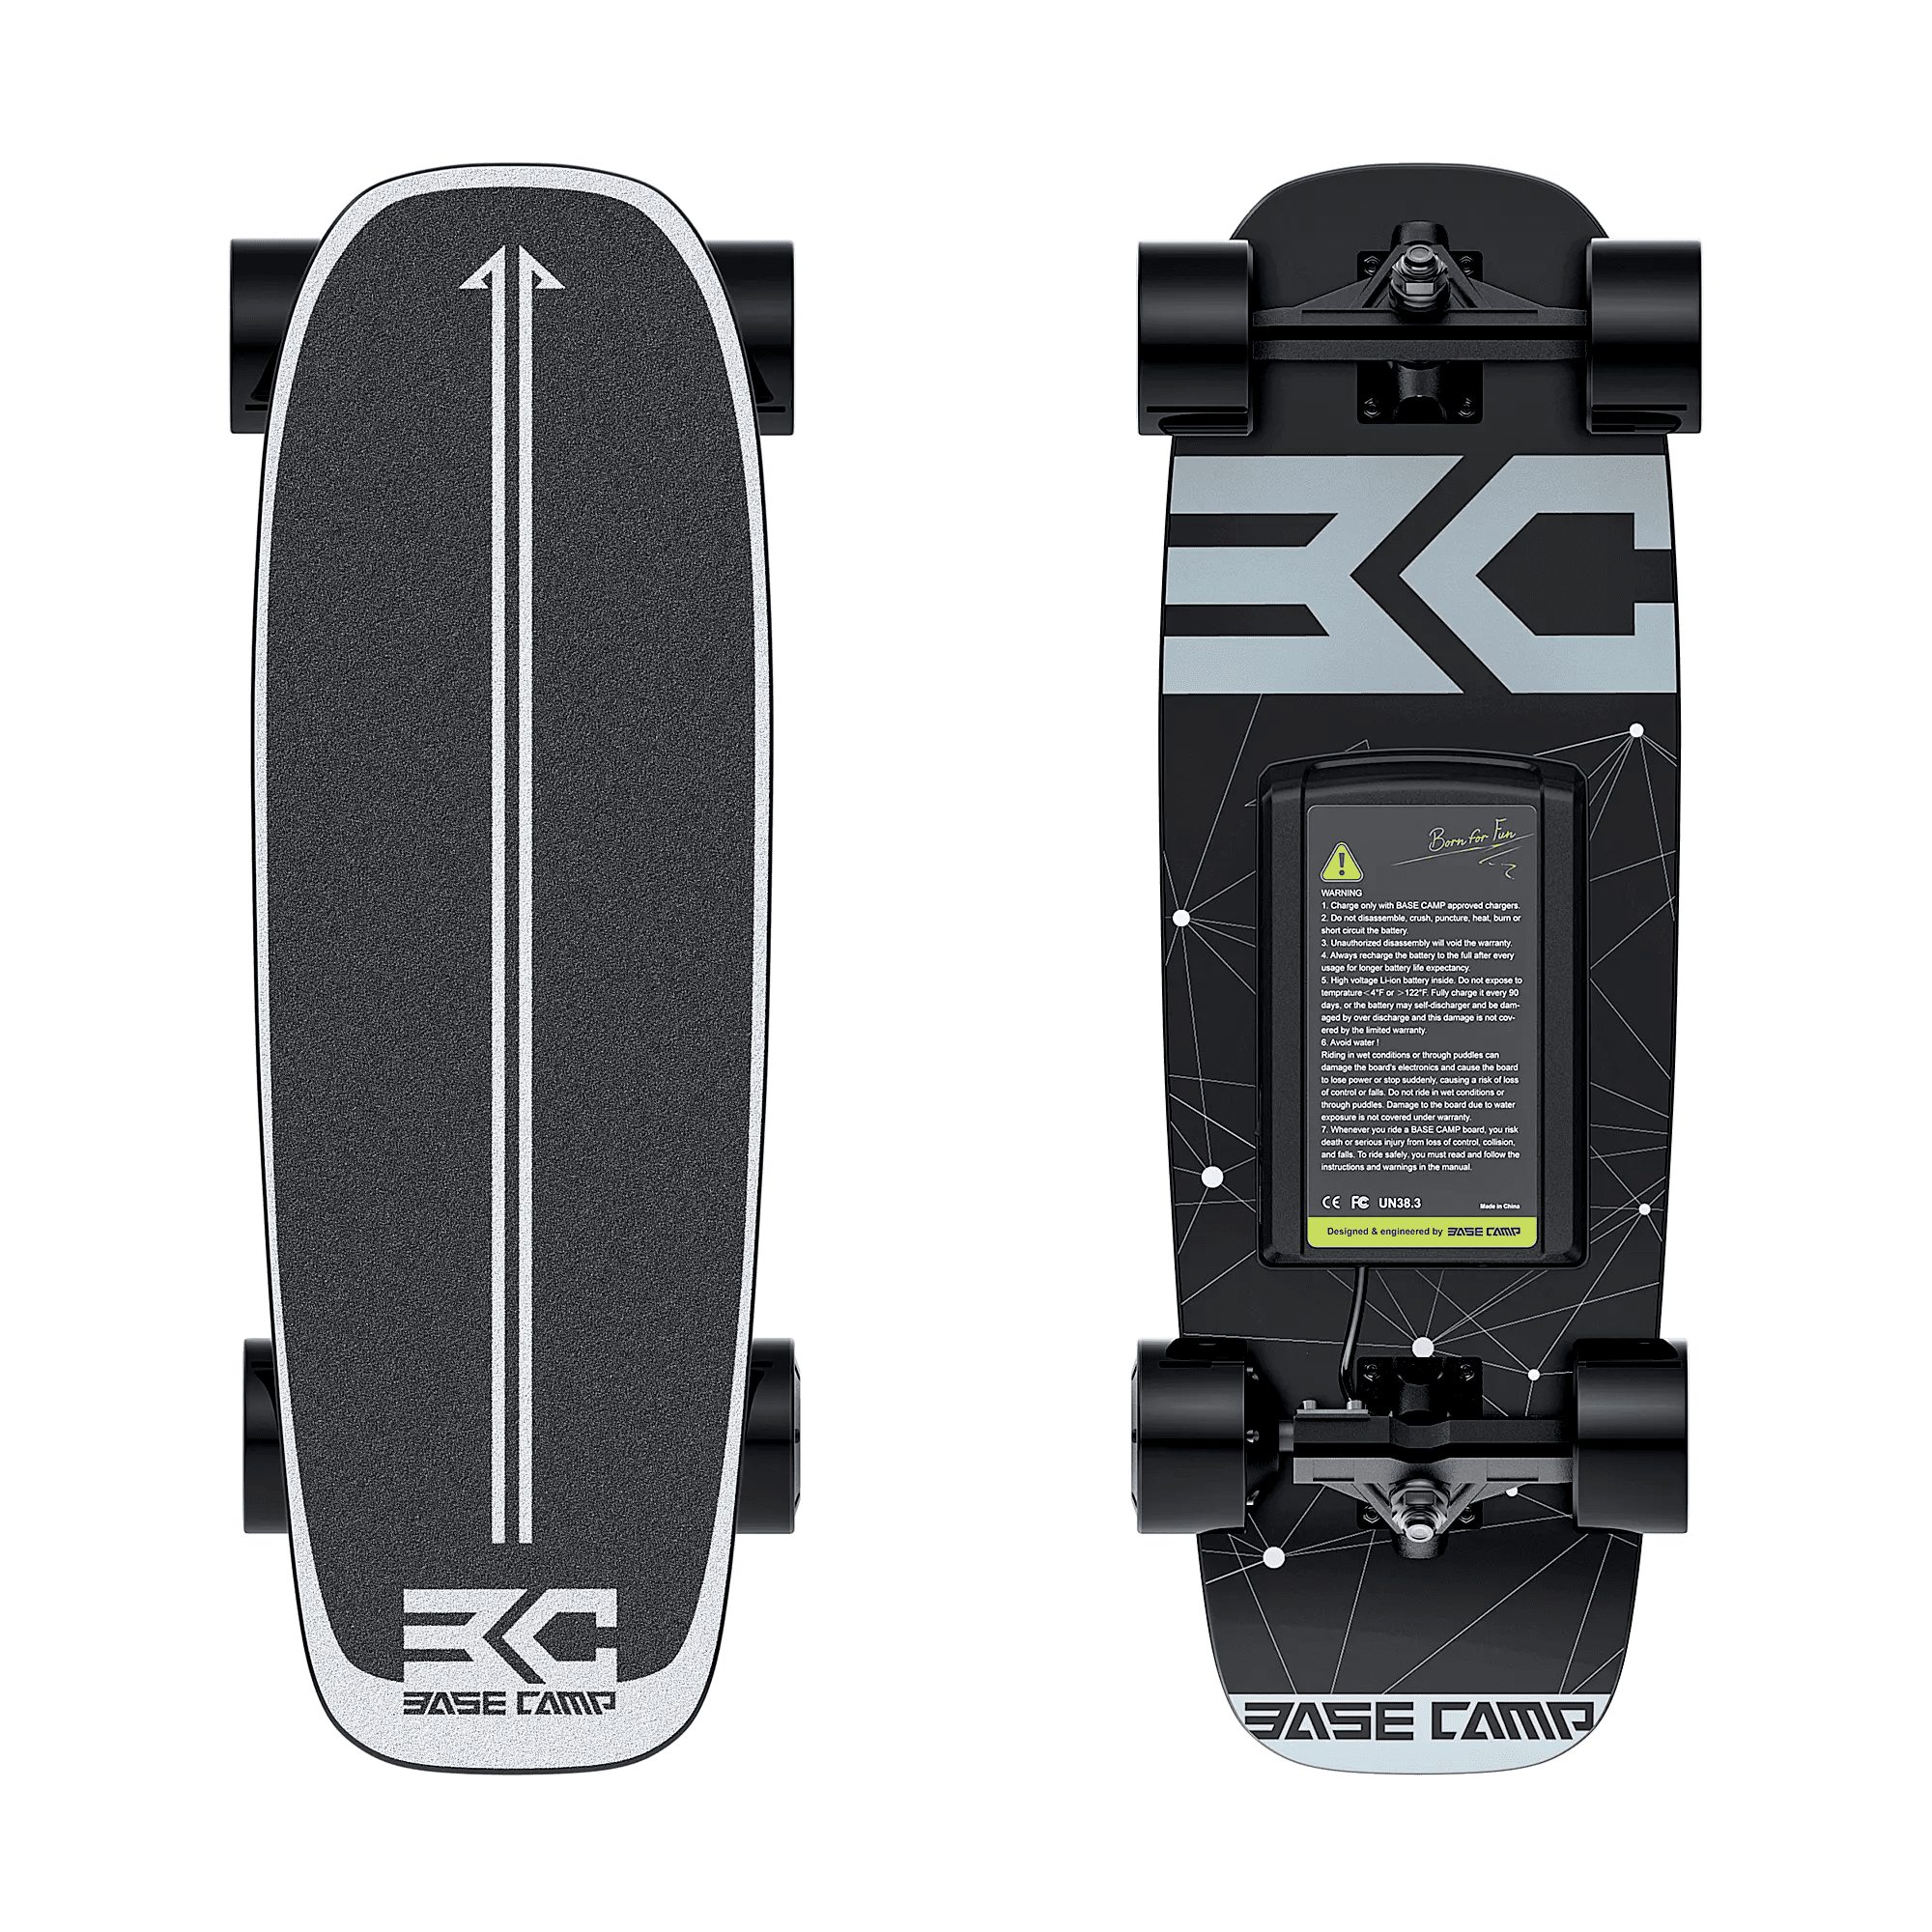 The BASE CAMP F11 electric skateboard features a Mini-cruiser style design. Its large and soft wheels and spacious, high-quality deck makes it a reliable and simple option for both experienced skateboarders and beginners alike. It also has a portable backpack for easy to bring with you anywhere.